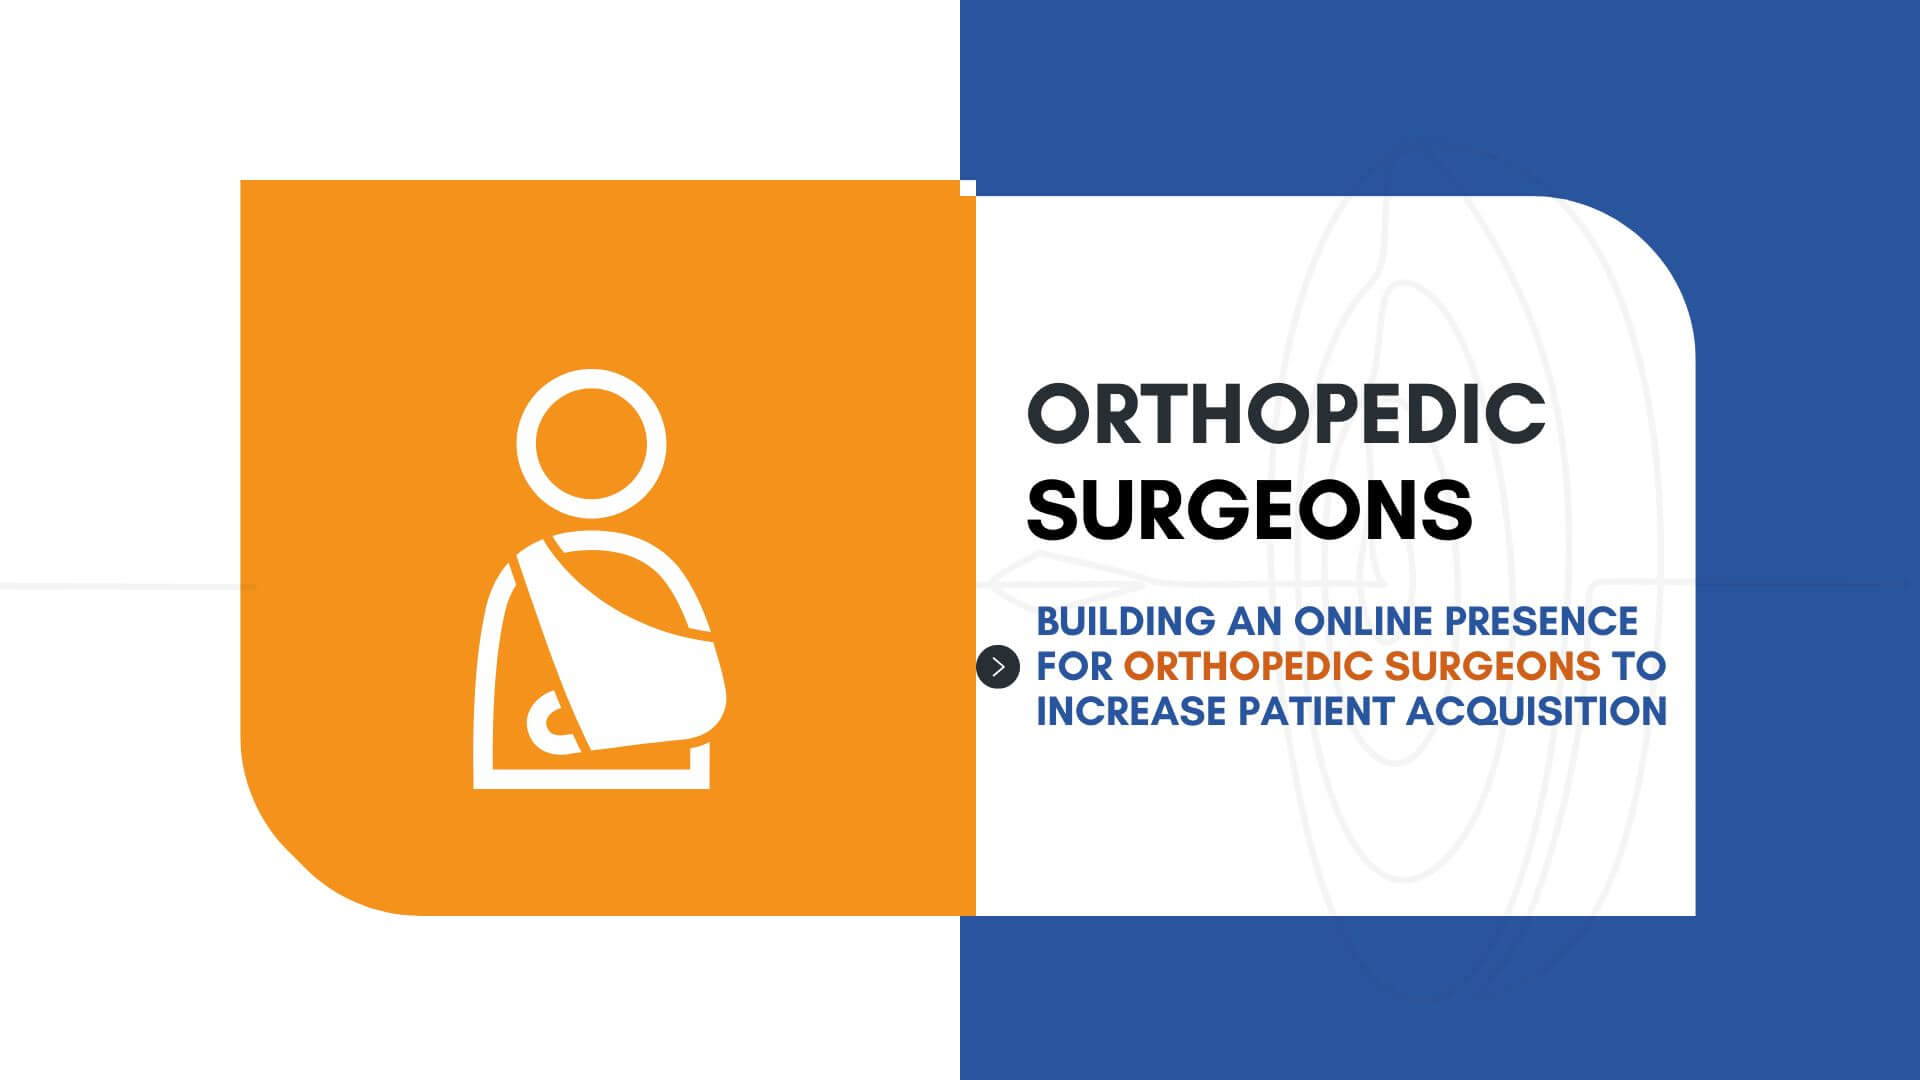 Building An Online Presence For Orthopedic Surgeons To Increase Patient Acquisition